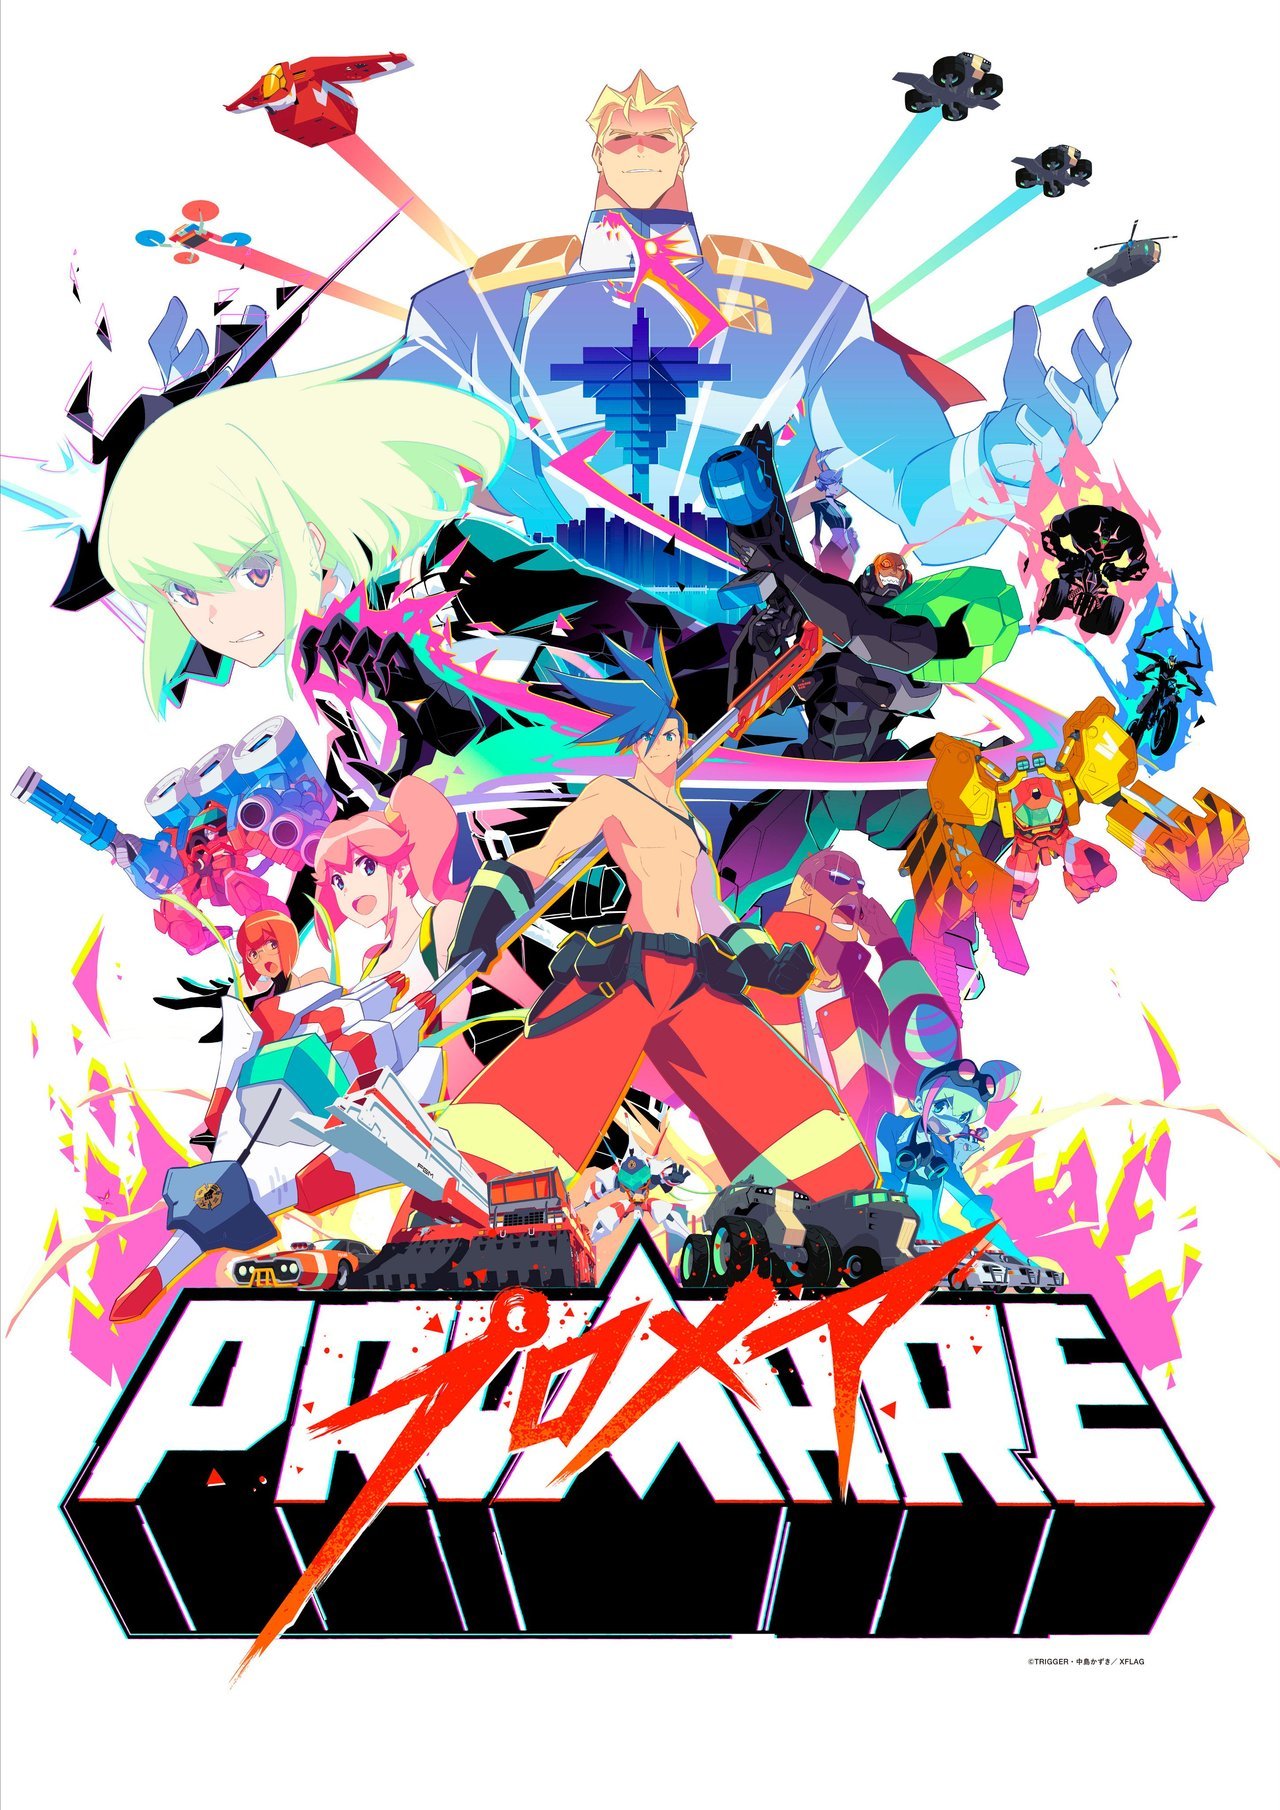 The latest poster visual for the upcoming âPromareâ anime film has been unveiled. Itâll open in Japanese theaters May 24th. -Synopsis-ââGalo and the Burning Rescue Fire Department face off against BURNISH, a group of mutants who are able to control...